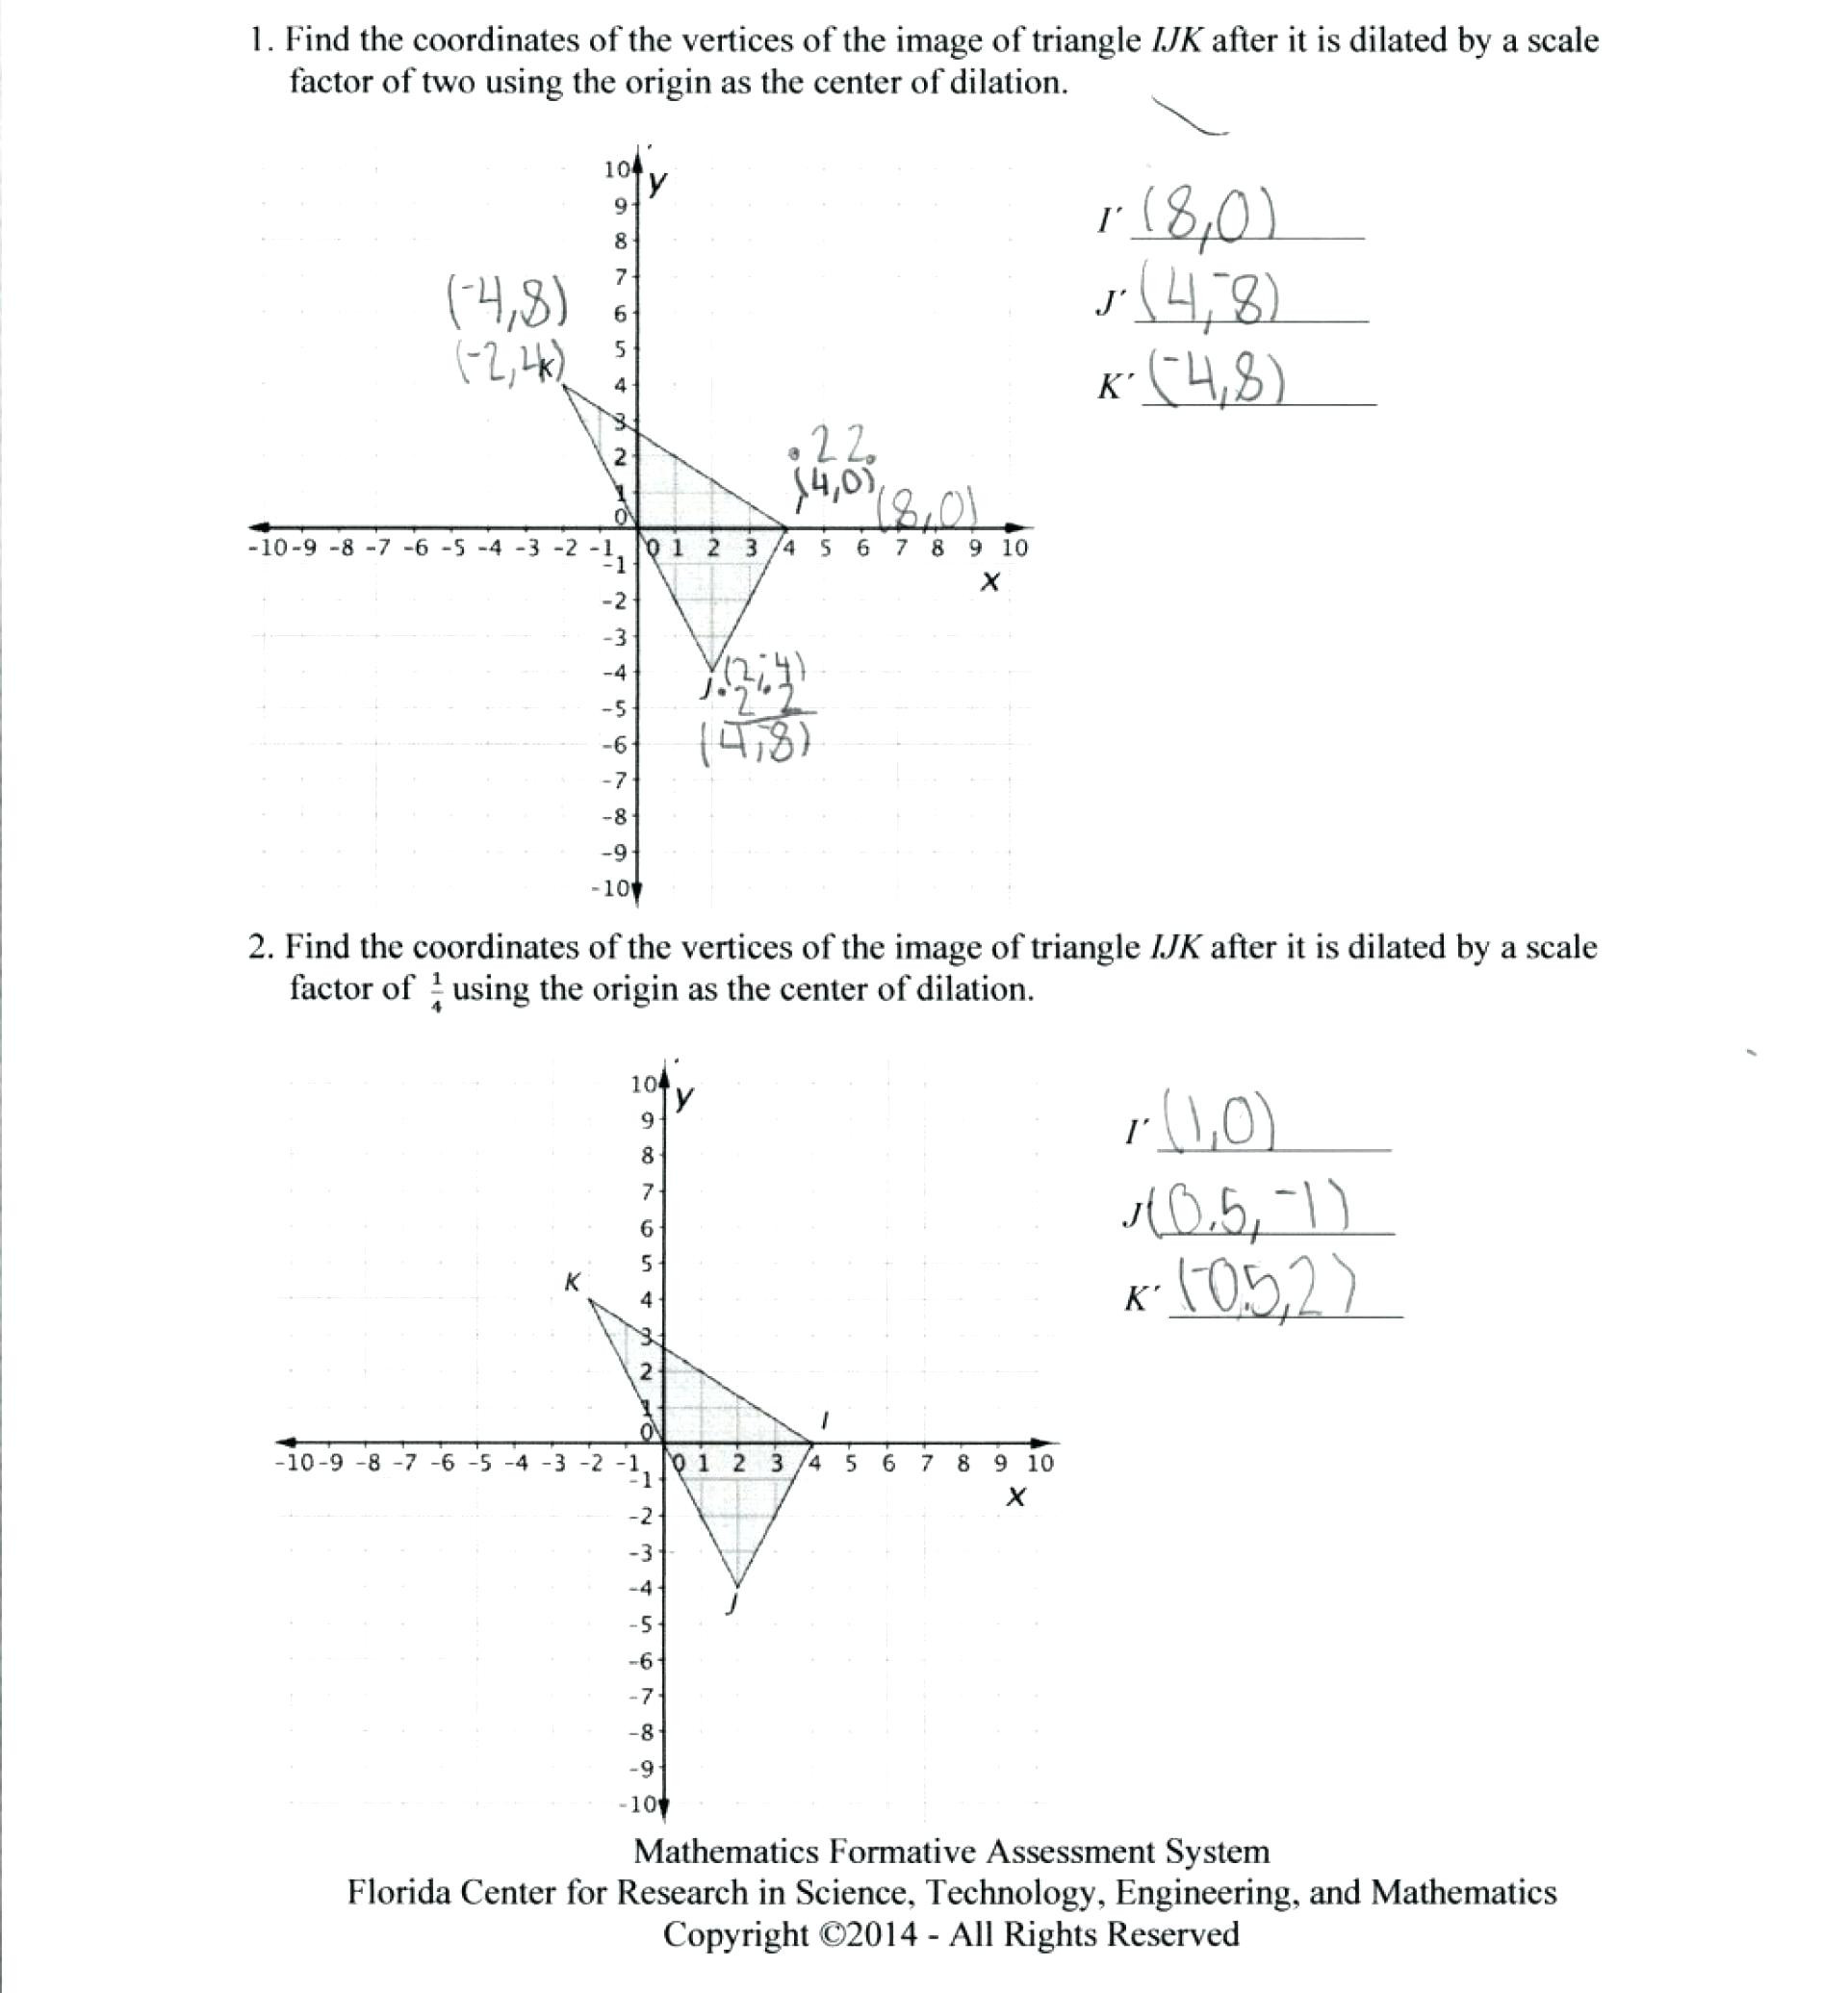 Free Math Worksheets Third Grade 3 Place Value and Rounding 5 Digit Number From Parts